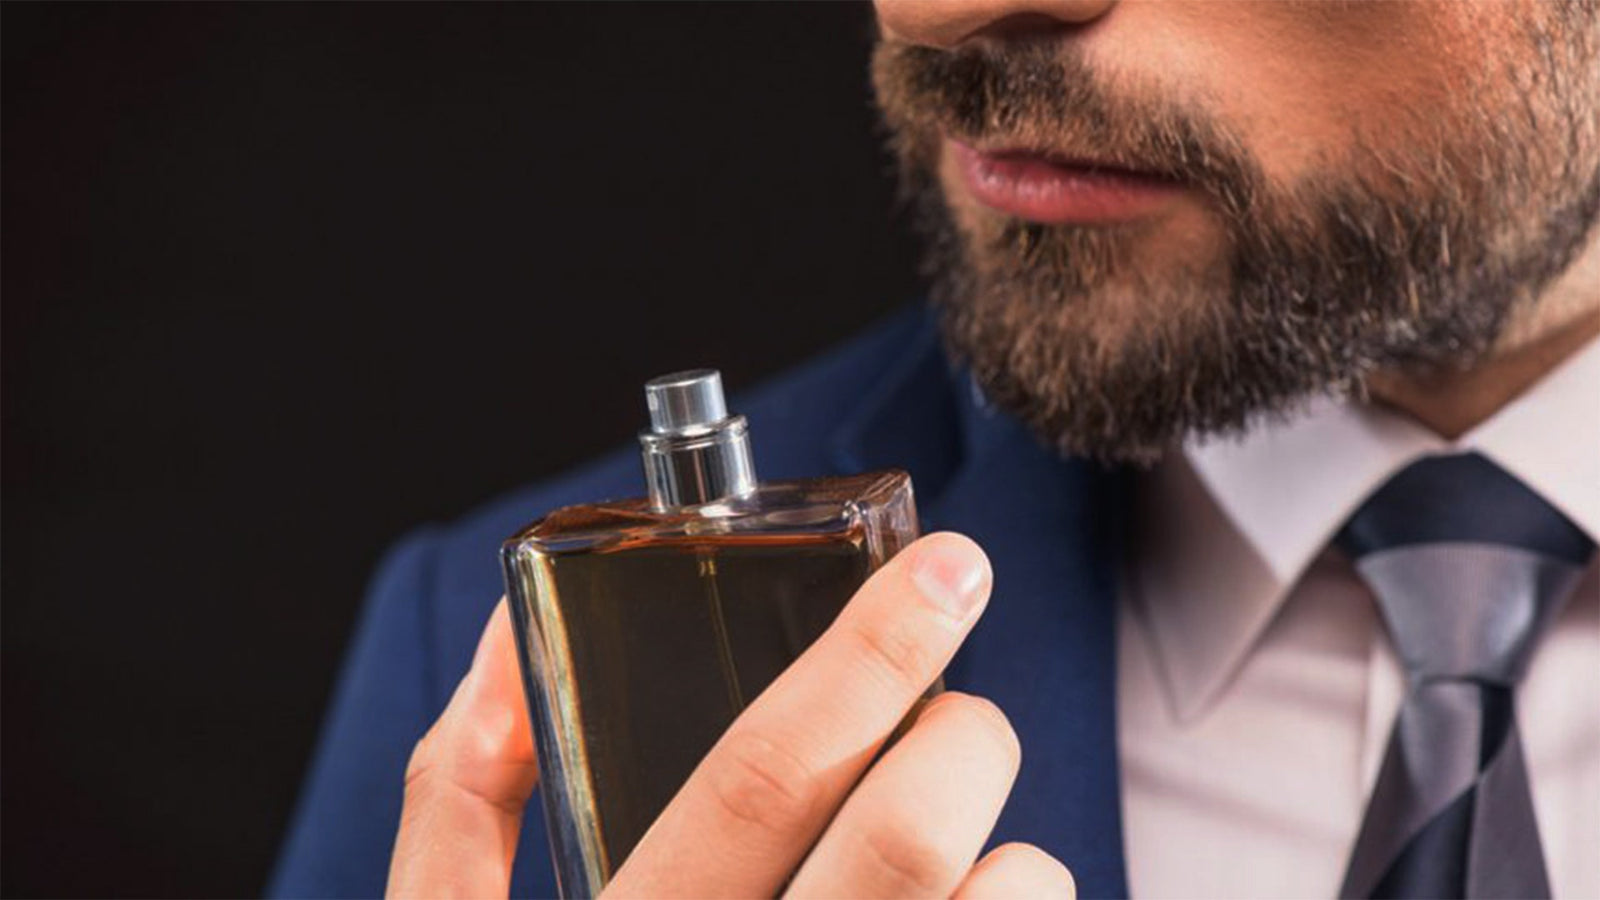 Winter Fragrances for Men - We give you the lowdown!